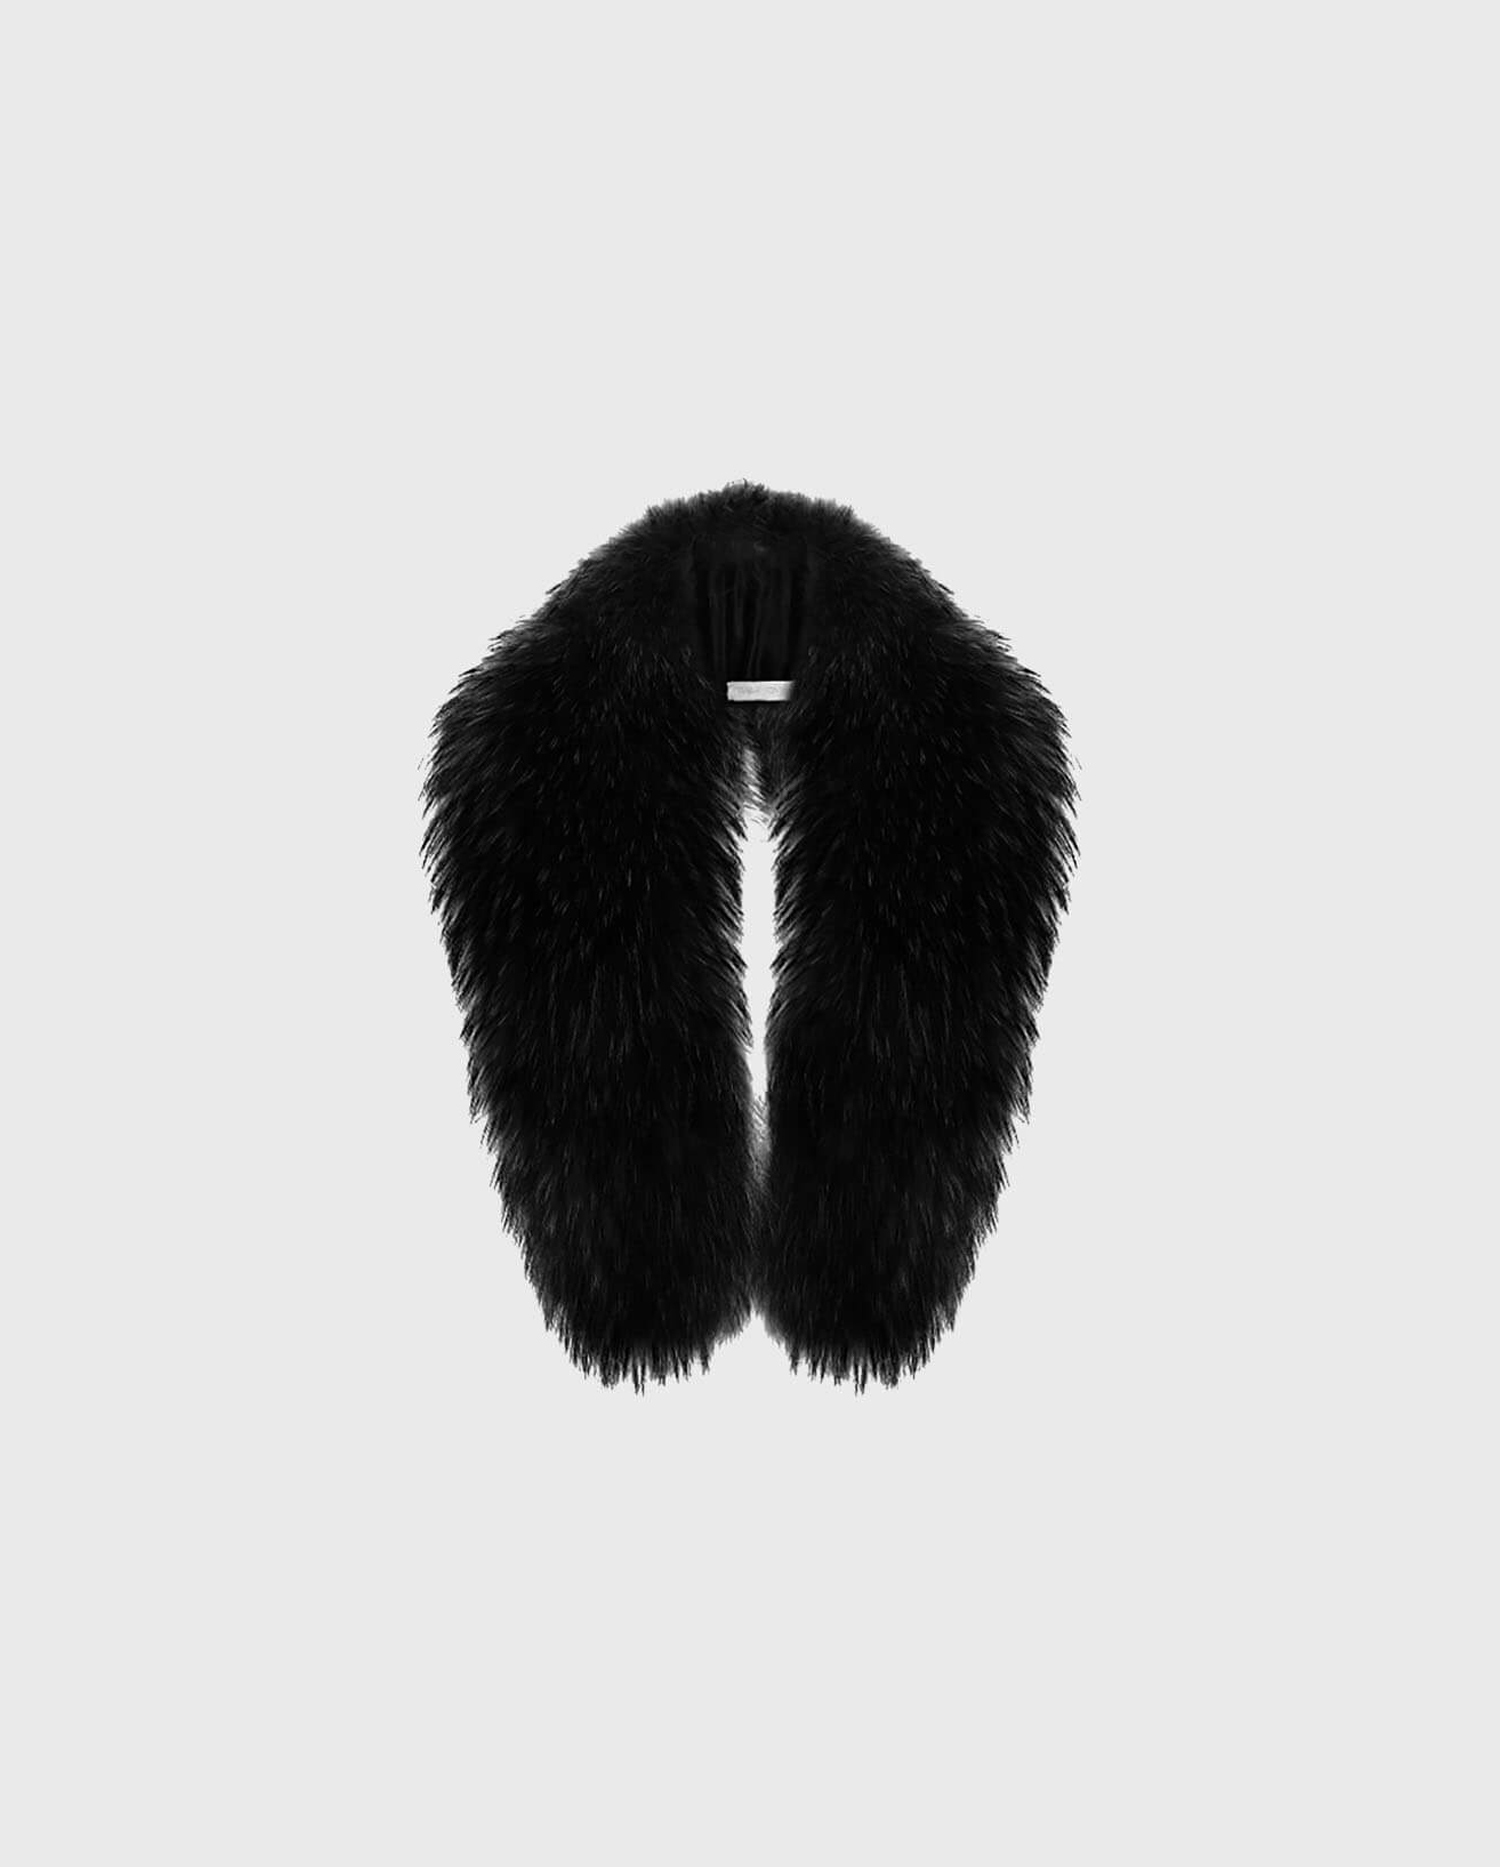 Discover the BLAIR Black fur collar from ANNE FONTAINE